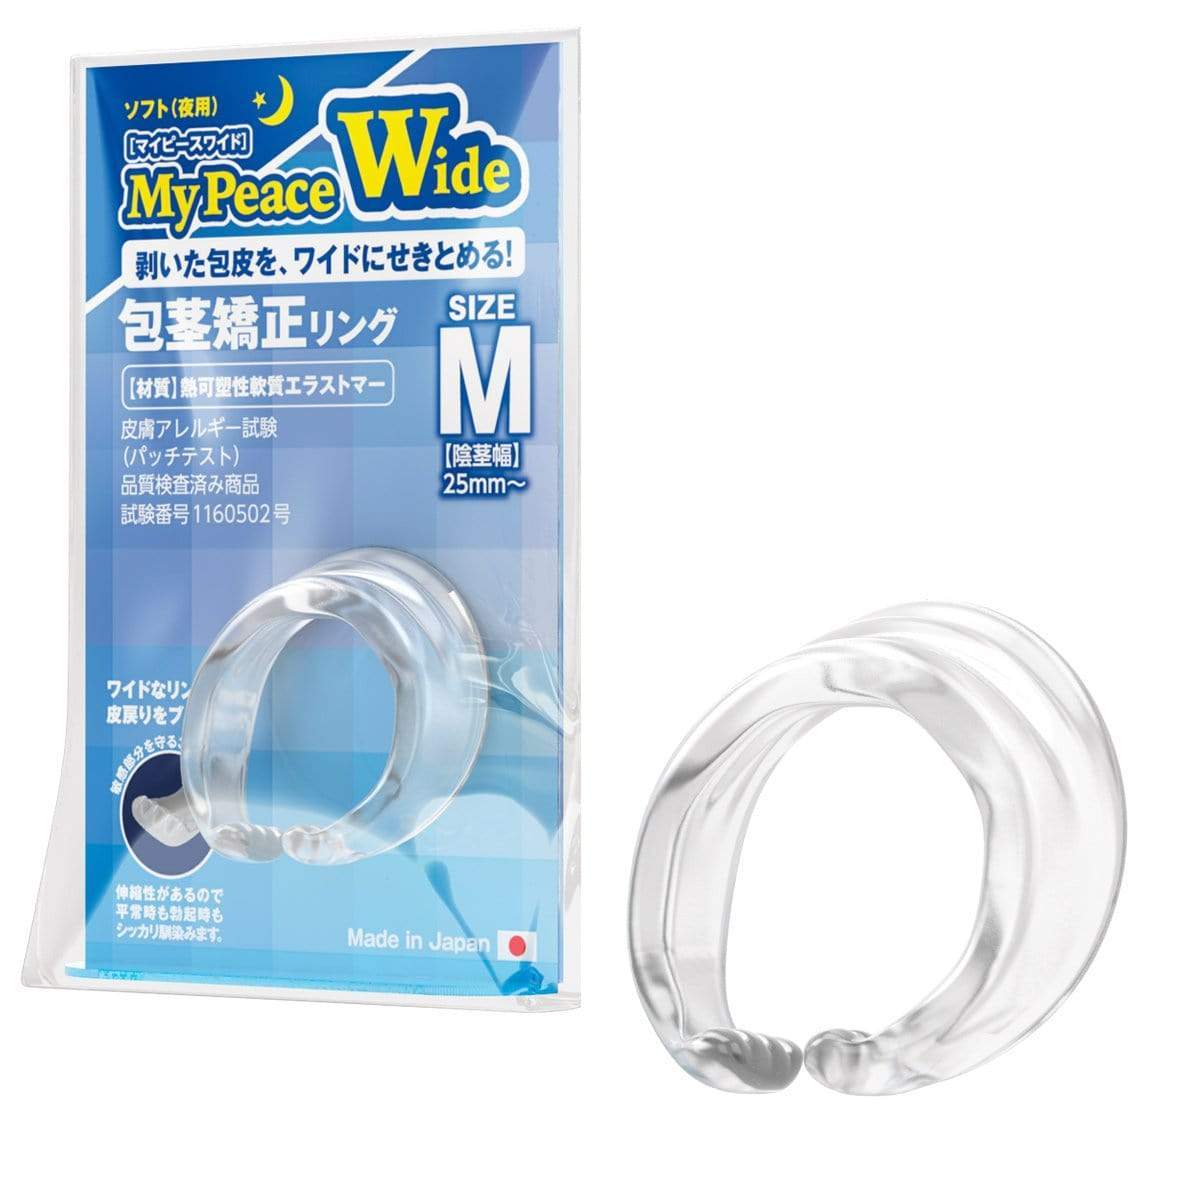 SSI Japan - My Peace Wide Soft Night Size M Correction Cock Ring (Clear) Cock Ring (Non Vibration) 4582137934121 CherryAffairs